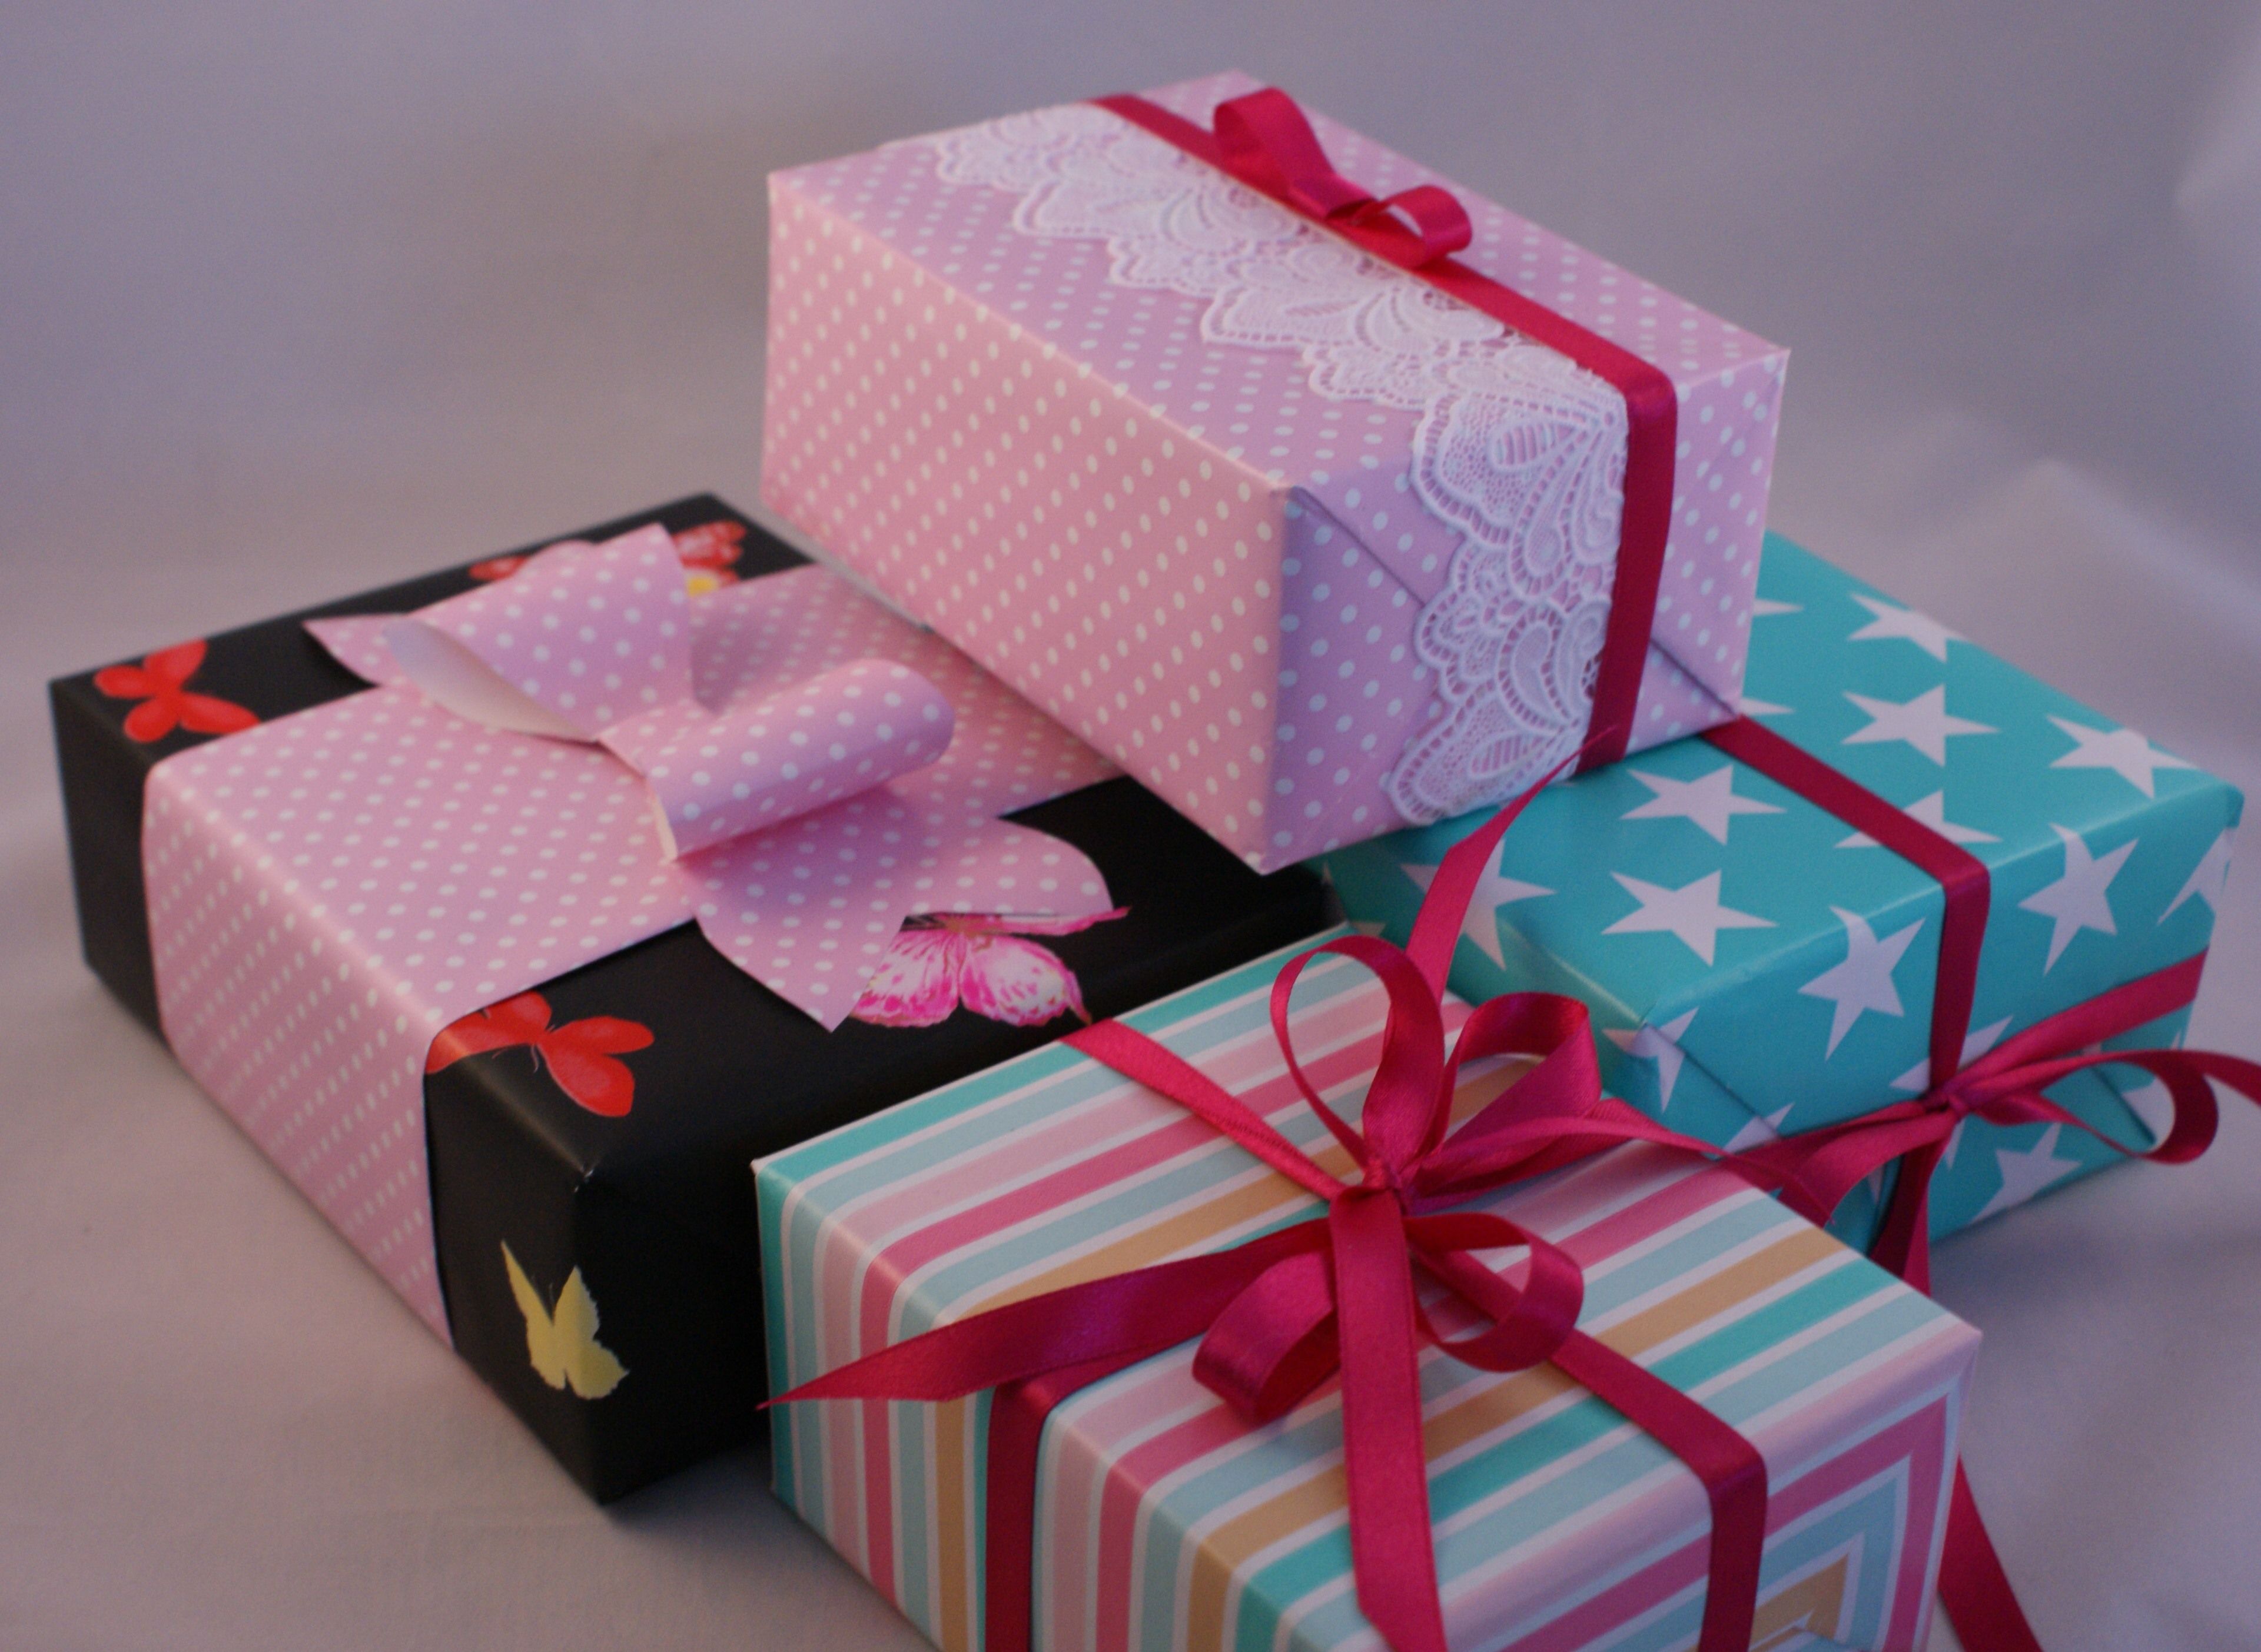 Send someone a Fairbow present, and we will wrap it as a gift for you!